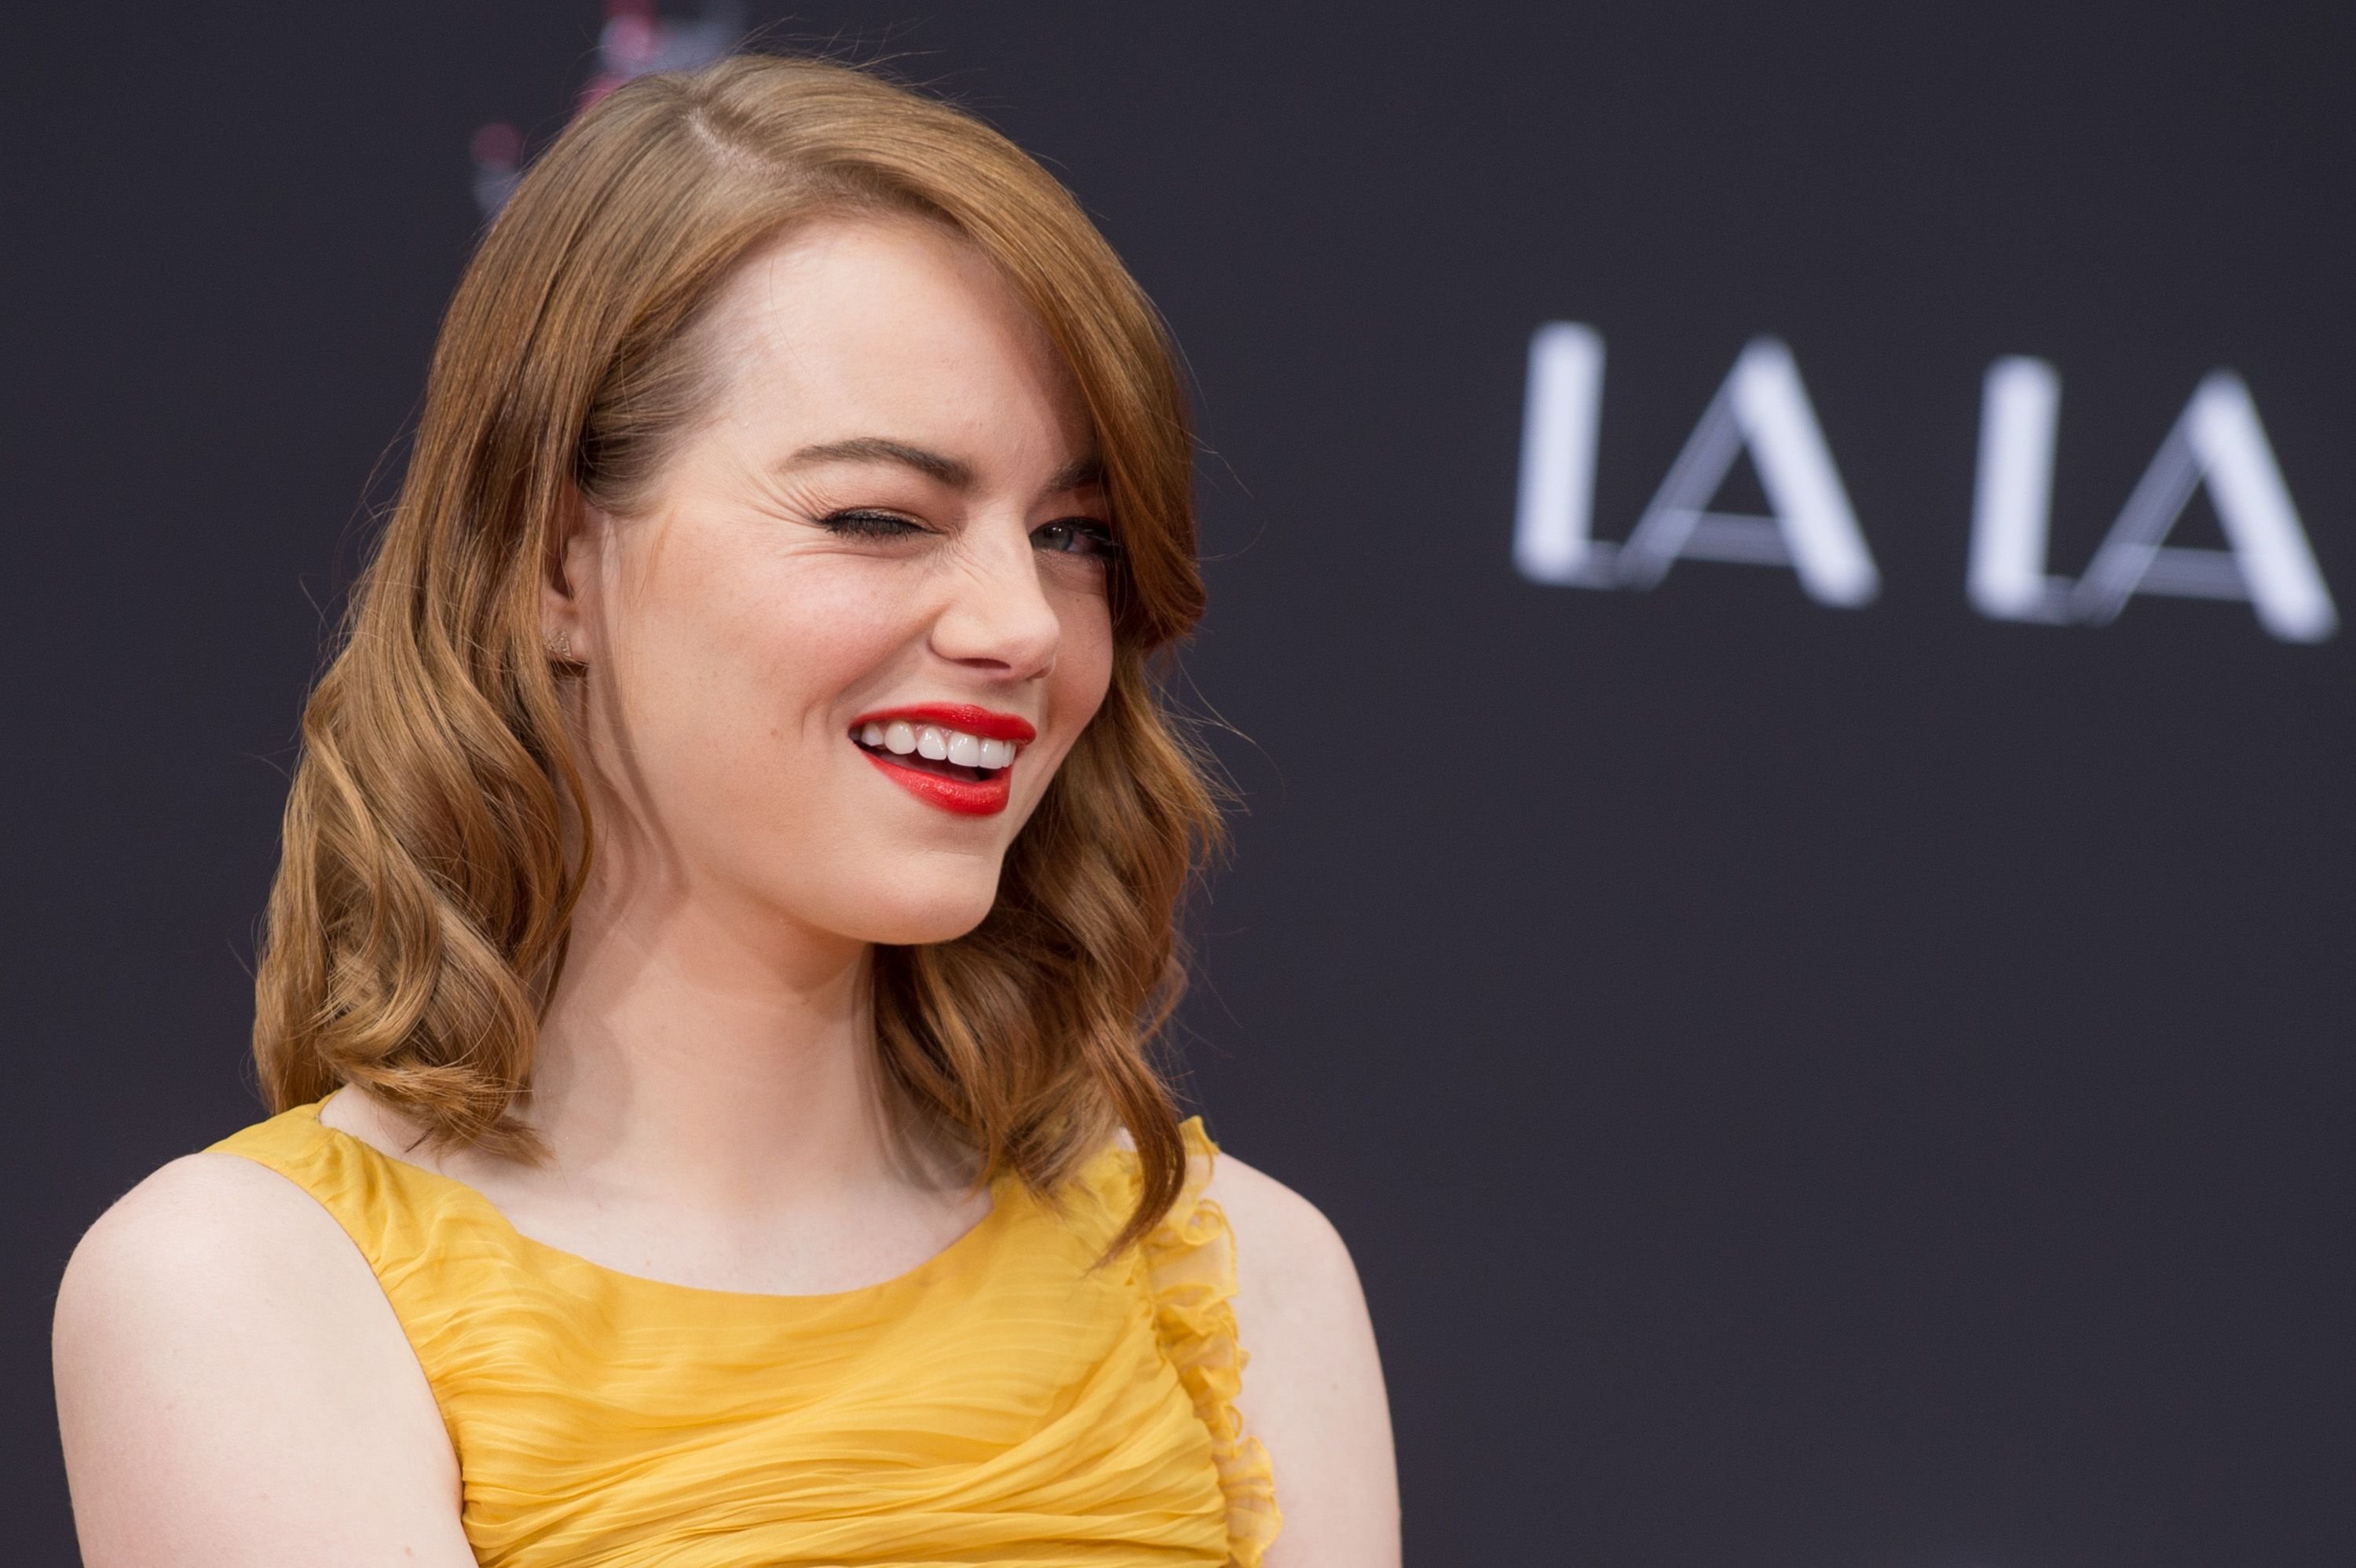 Emma Stone at TCL Chinese Theatre IMAX on December 7, 2016 in Hollywood, California. | Photo: Getty Images